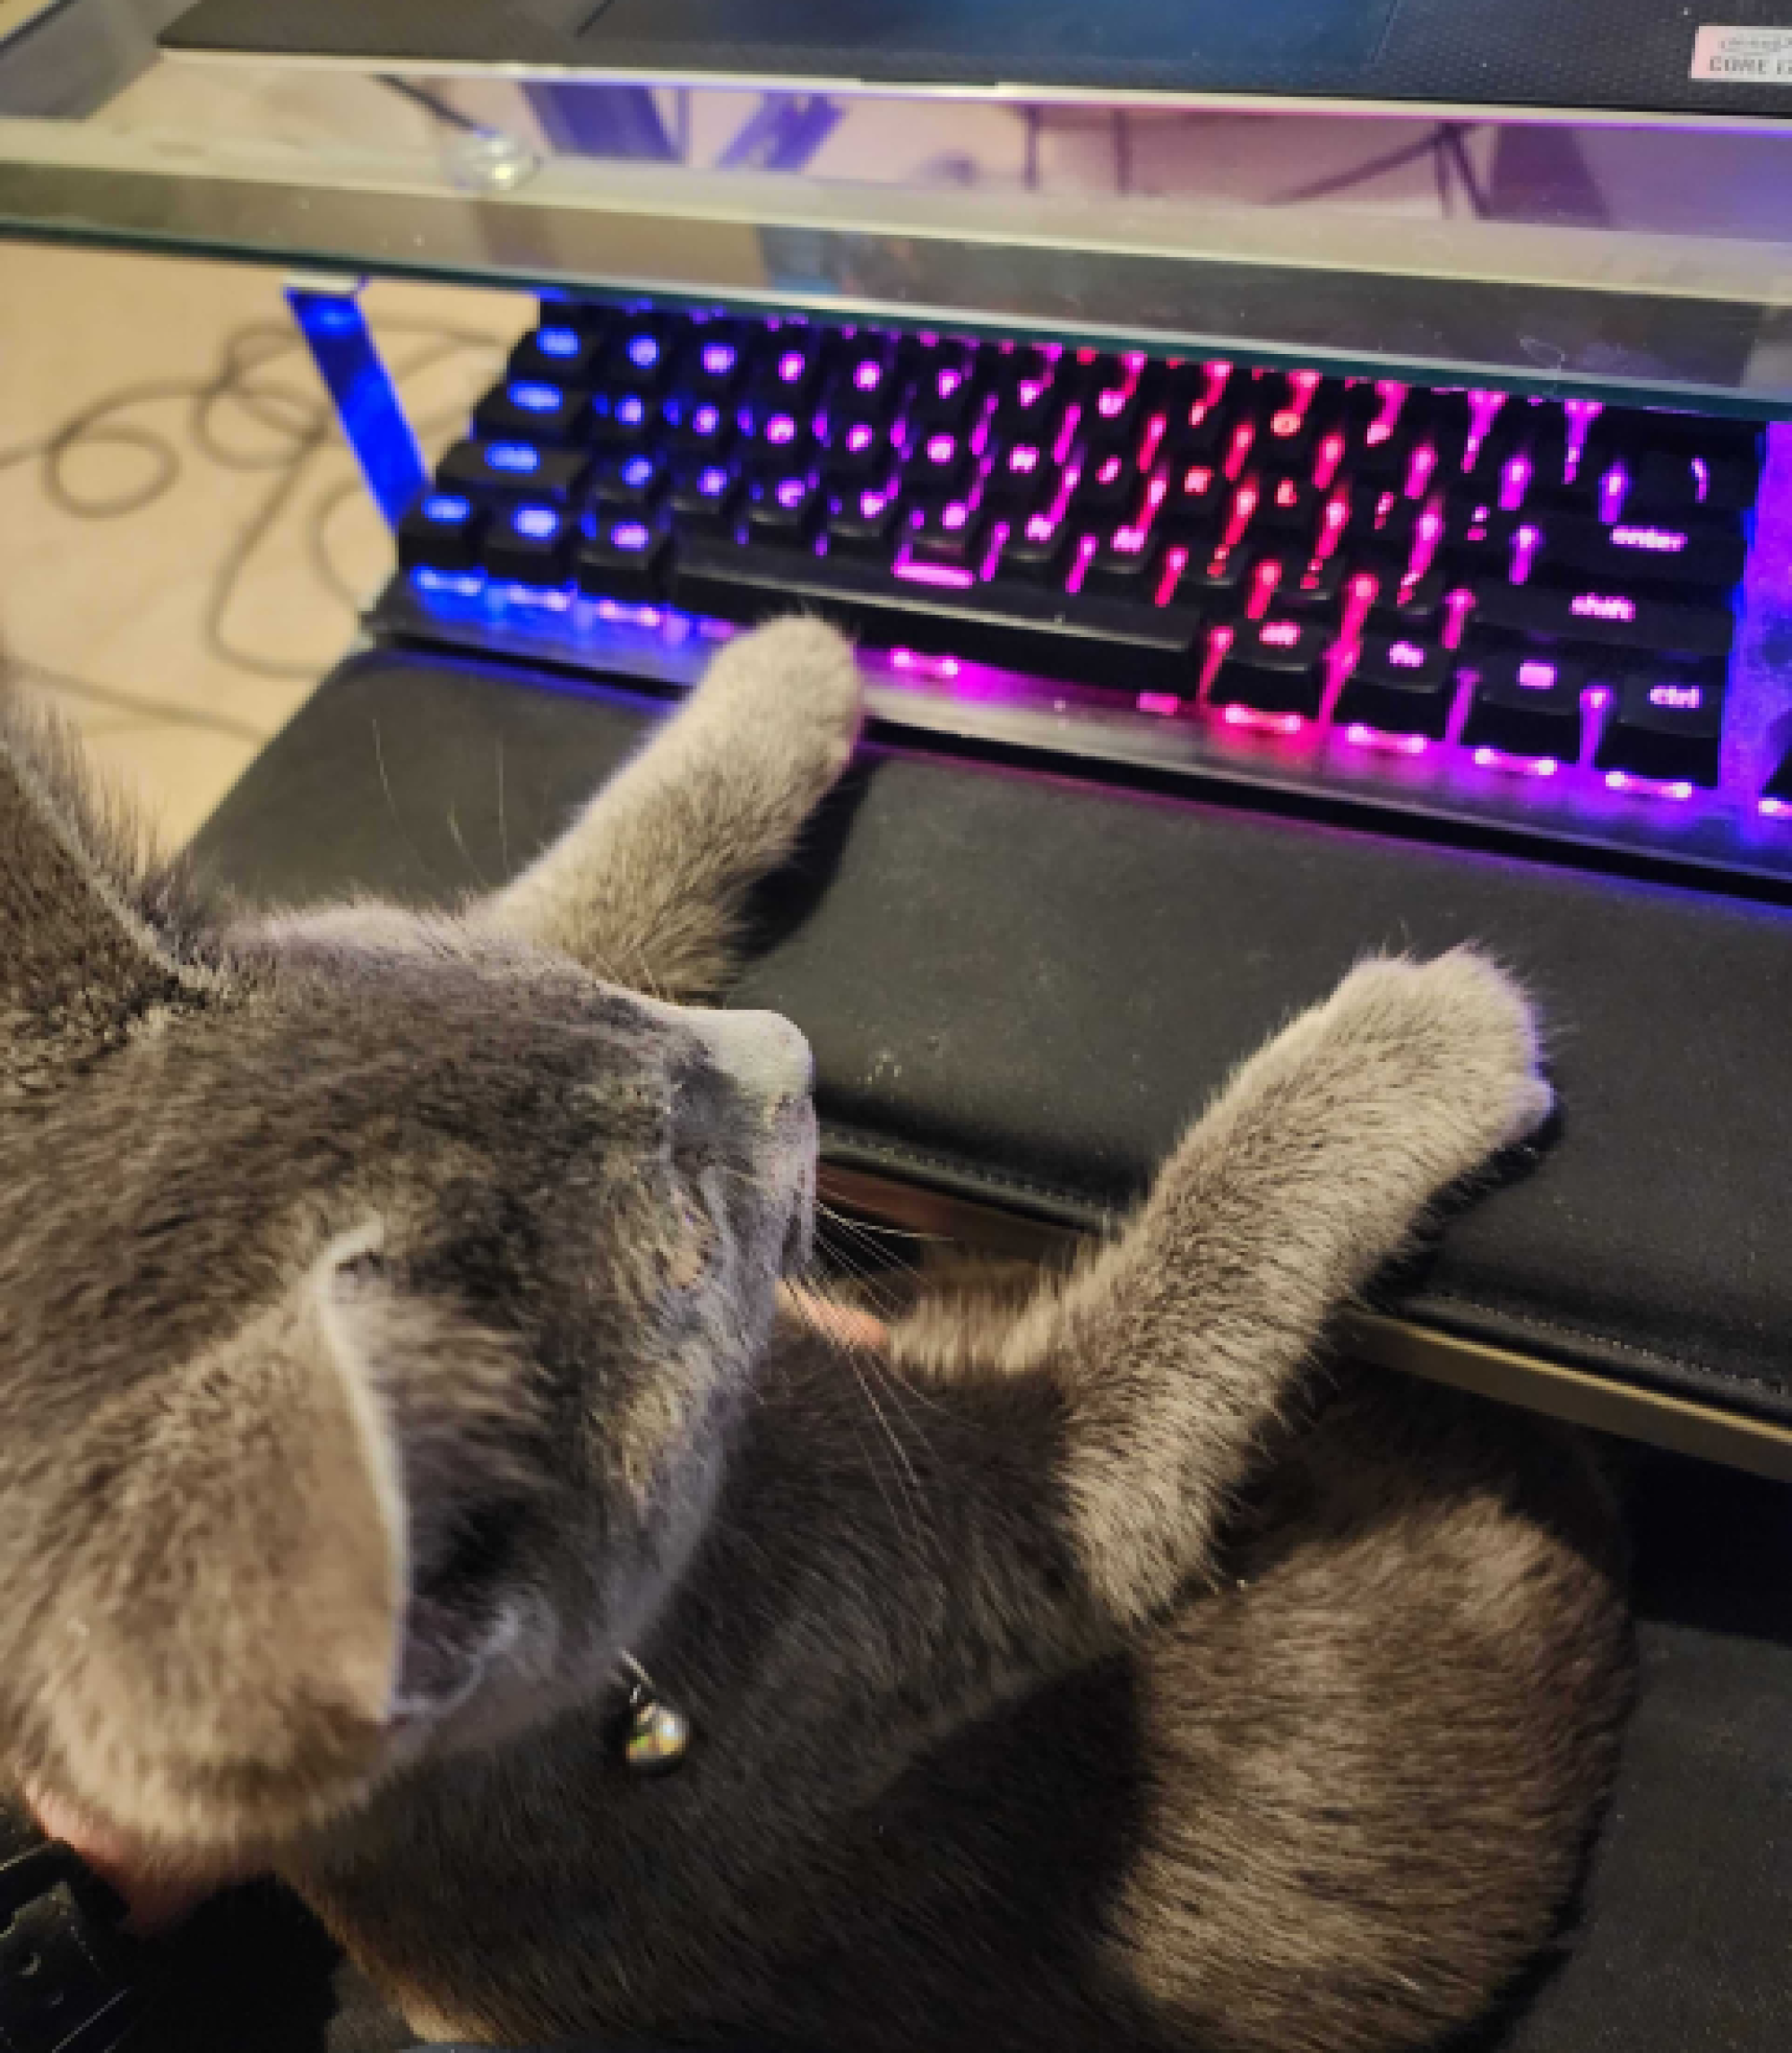 A small, light-gray cat sitting at a computer desk with their paws on a wrist-rest in front of a lit up keyboard